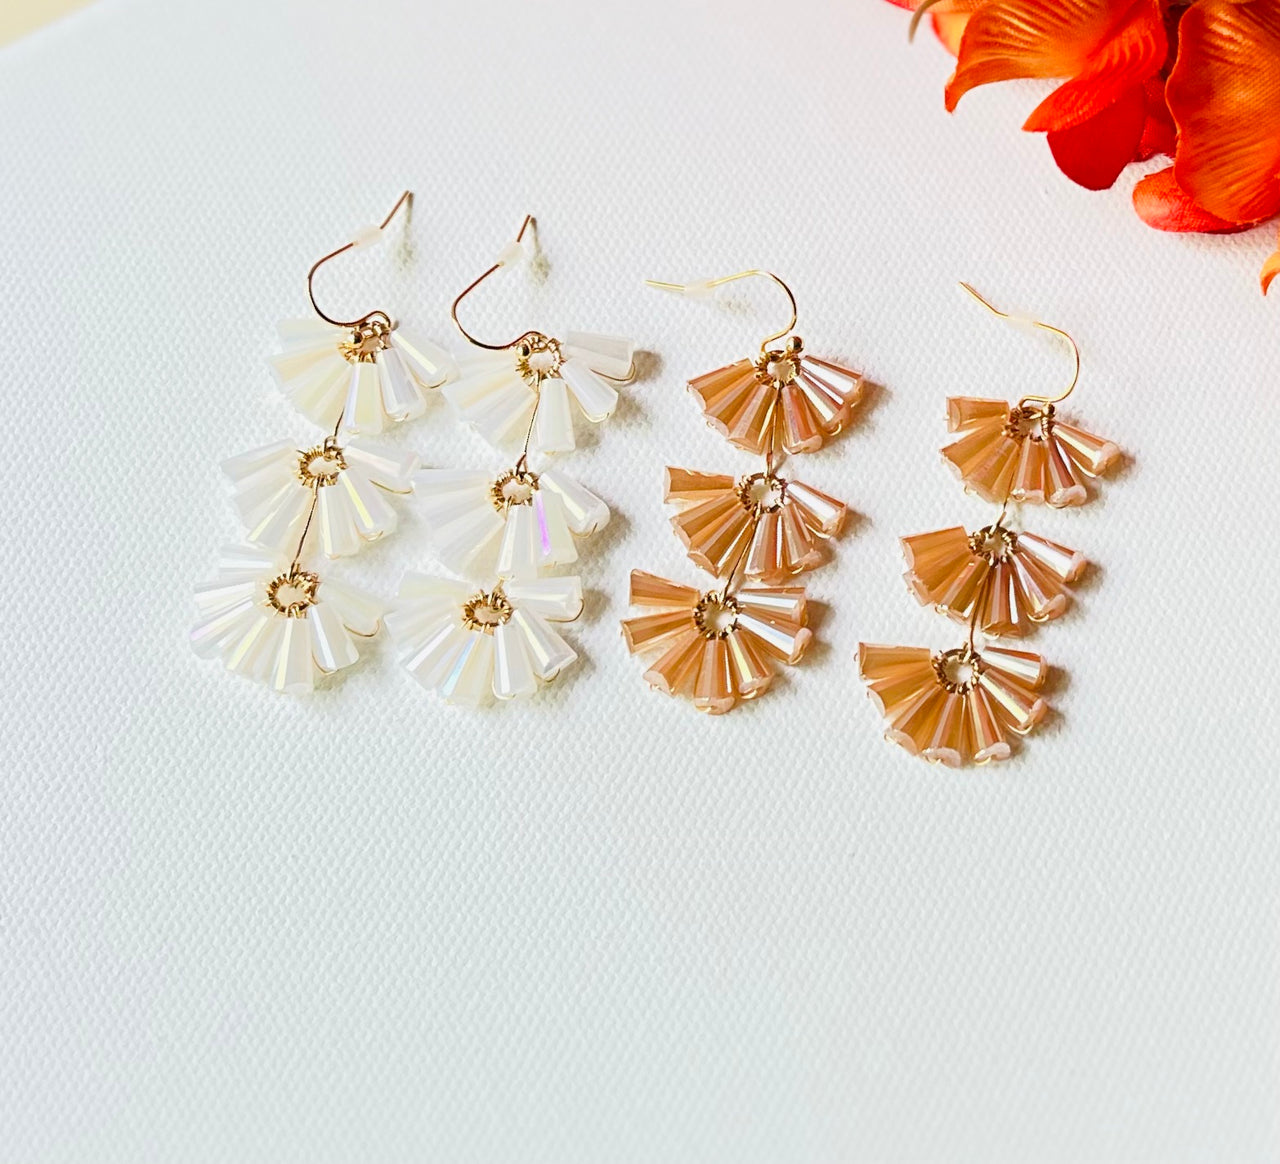 The "Tiered" Beaded earrings